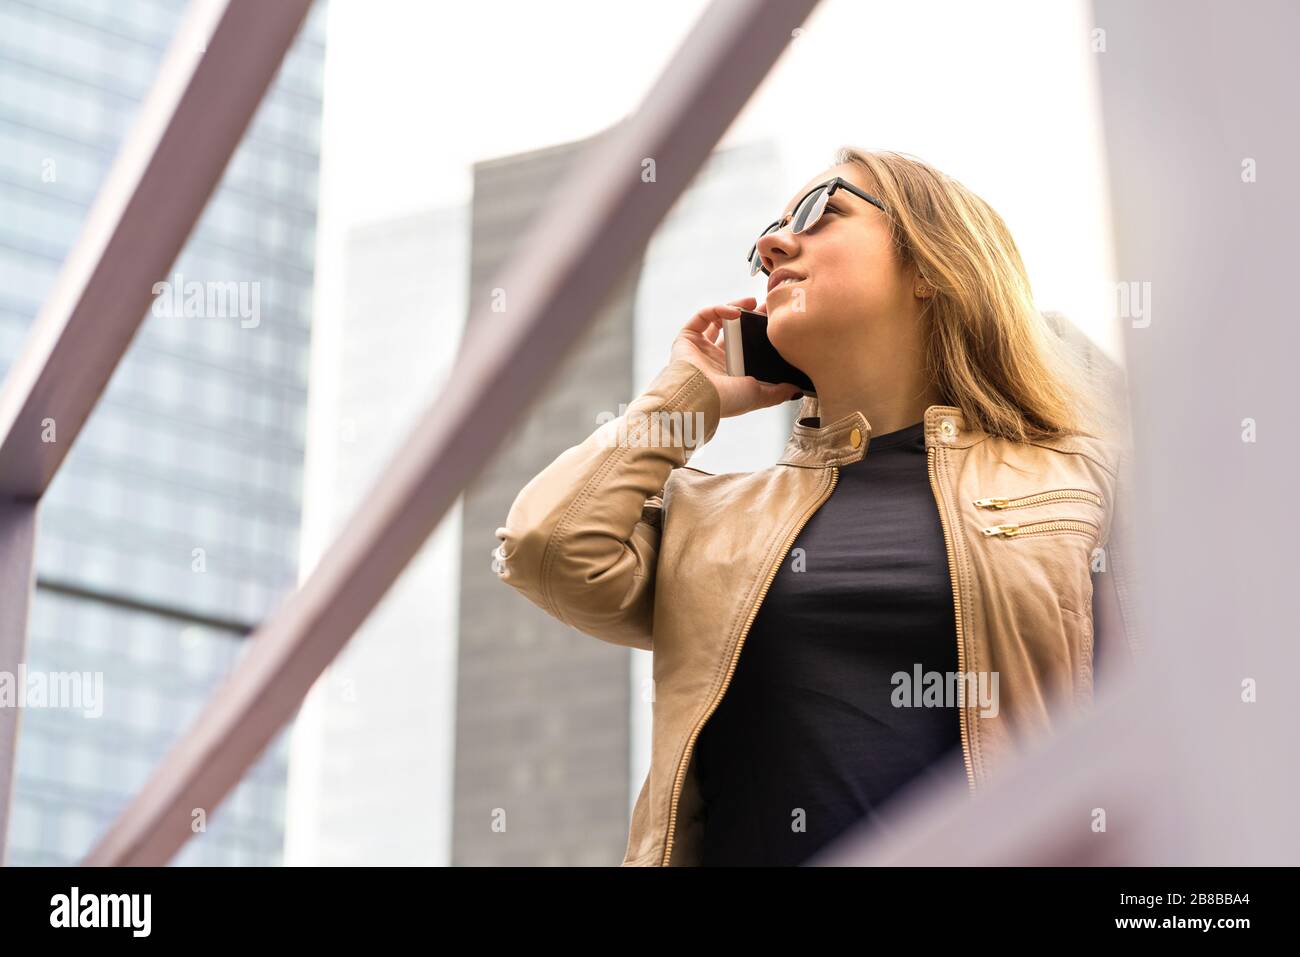 Woman talking on the phone in the city. Lady calling with smartphone. Neutral or serious face. Stock Photo